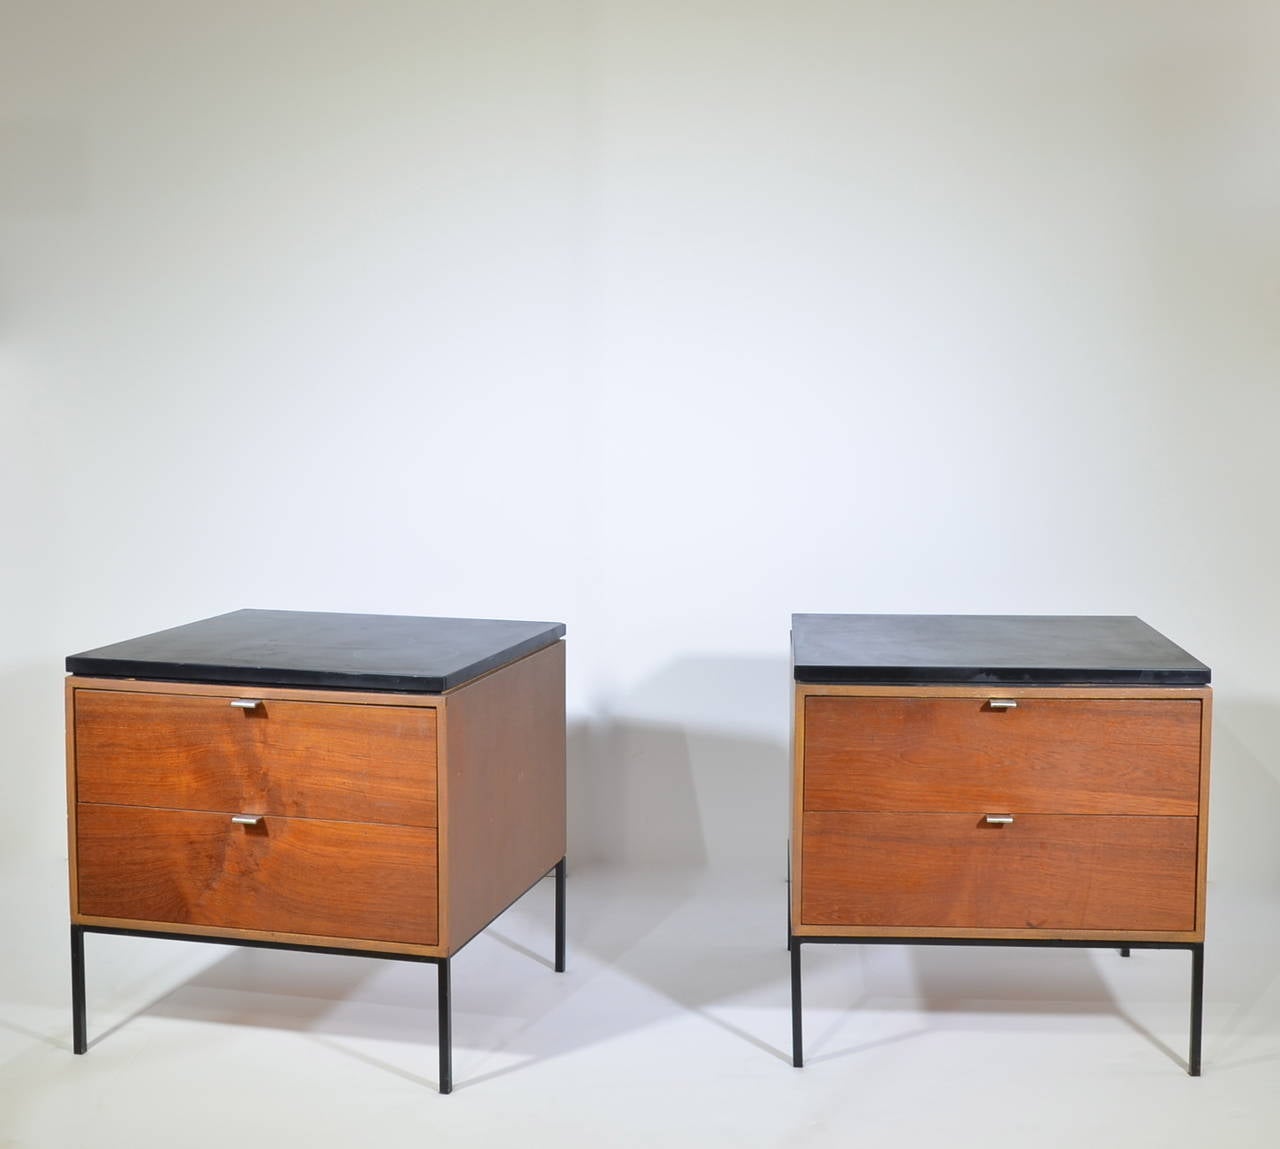 American Pair of End Tables, Steel Frame, by George Nelson, 1960s, for H. Miller For Sale